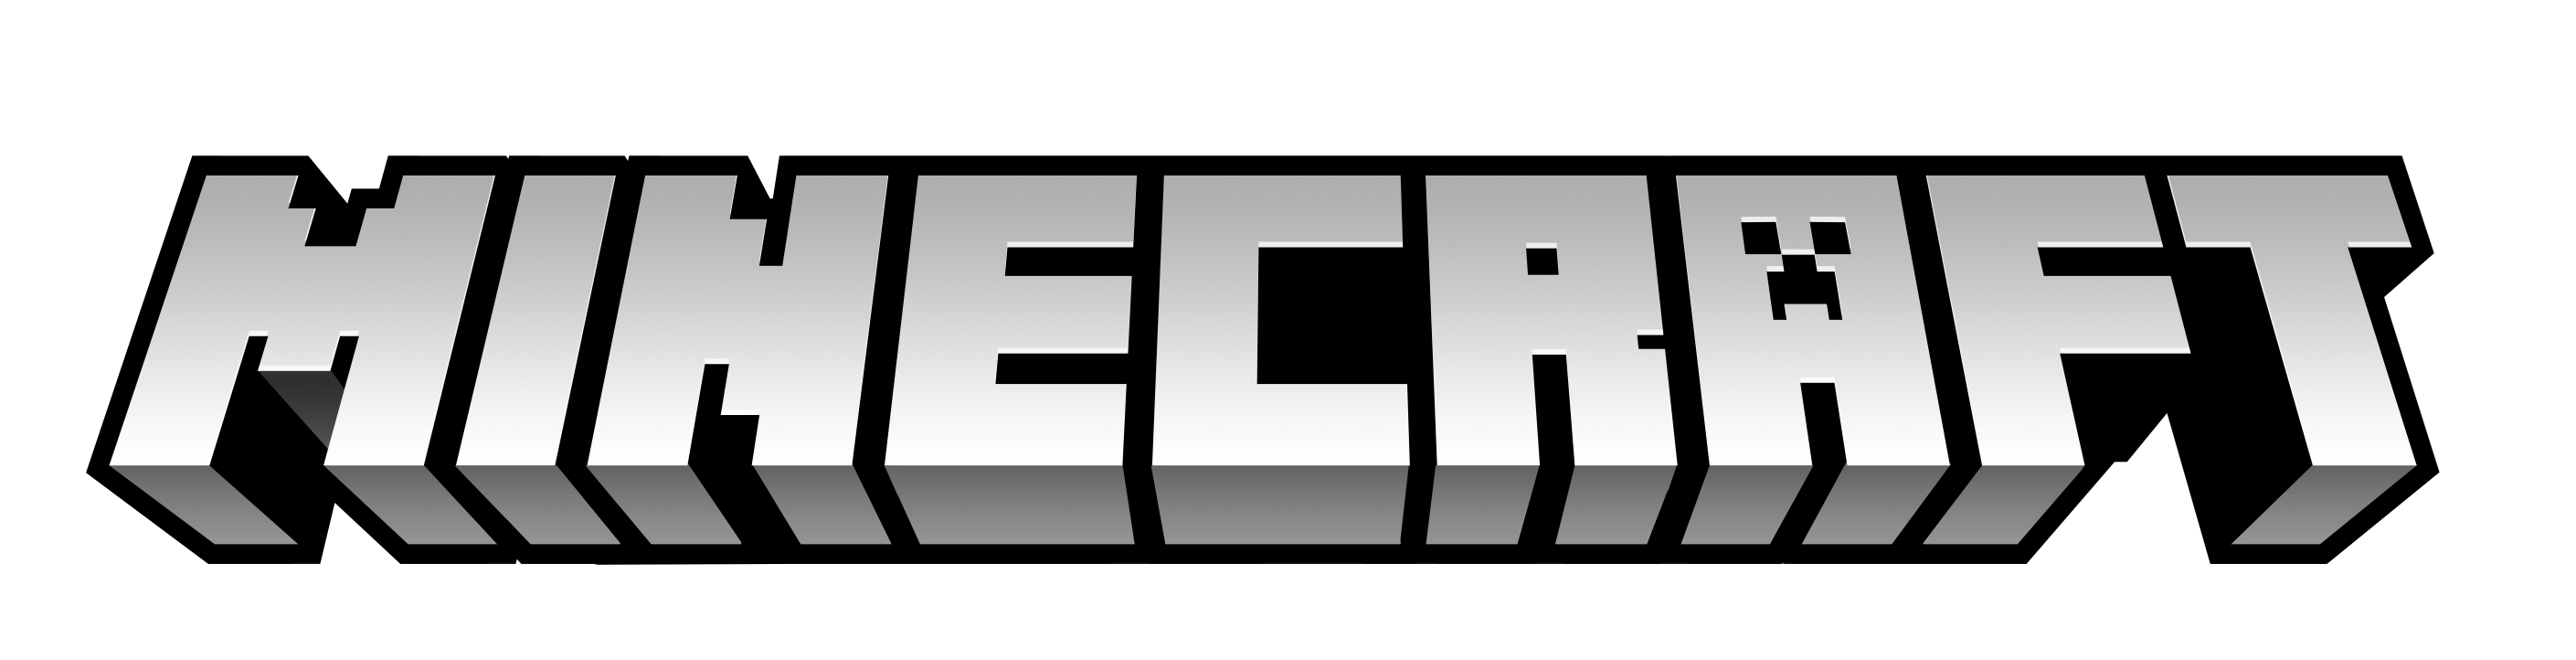 Minecraft clipart black and white. Logos 